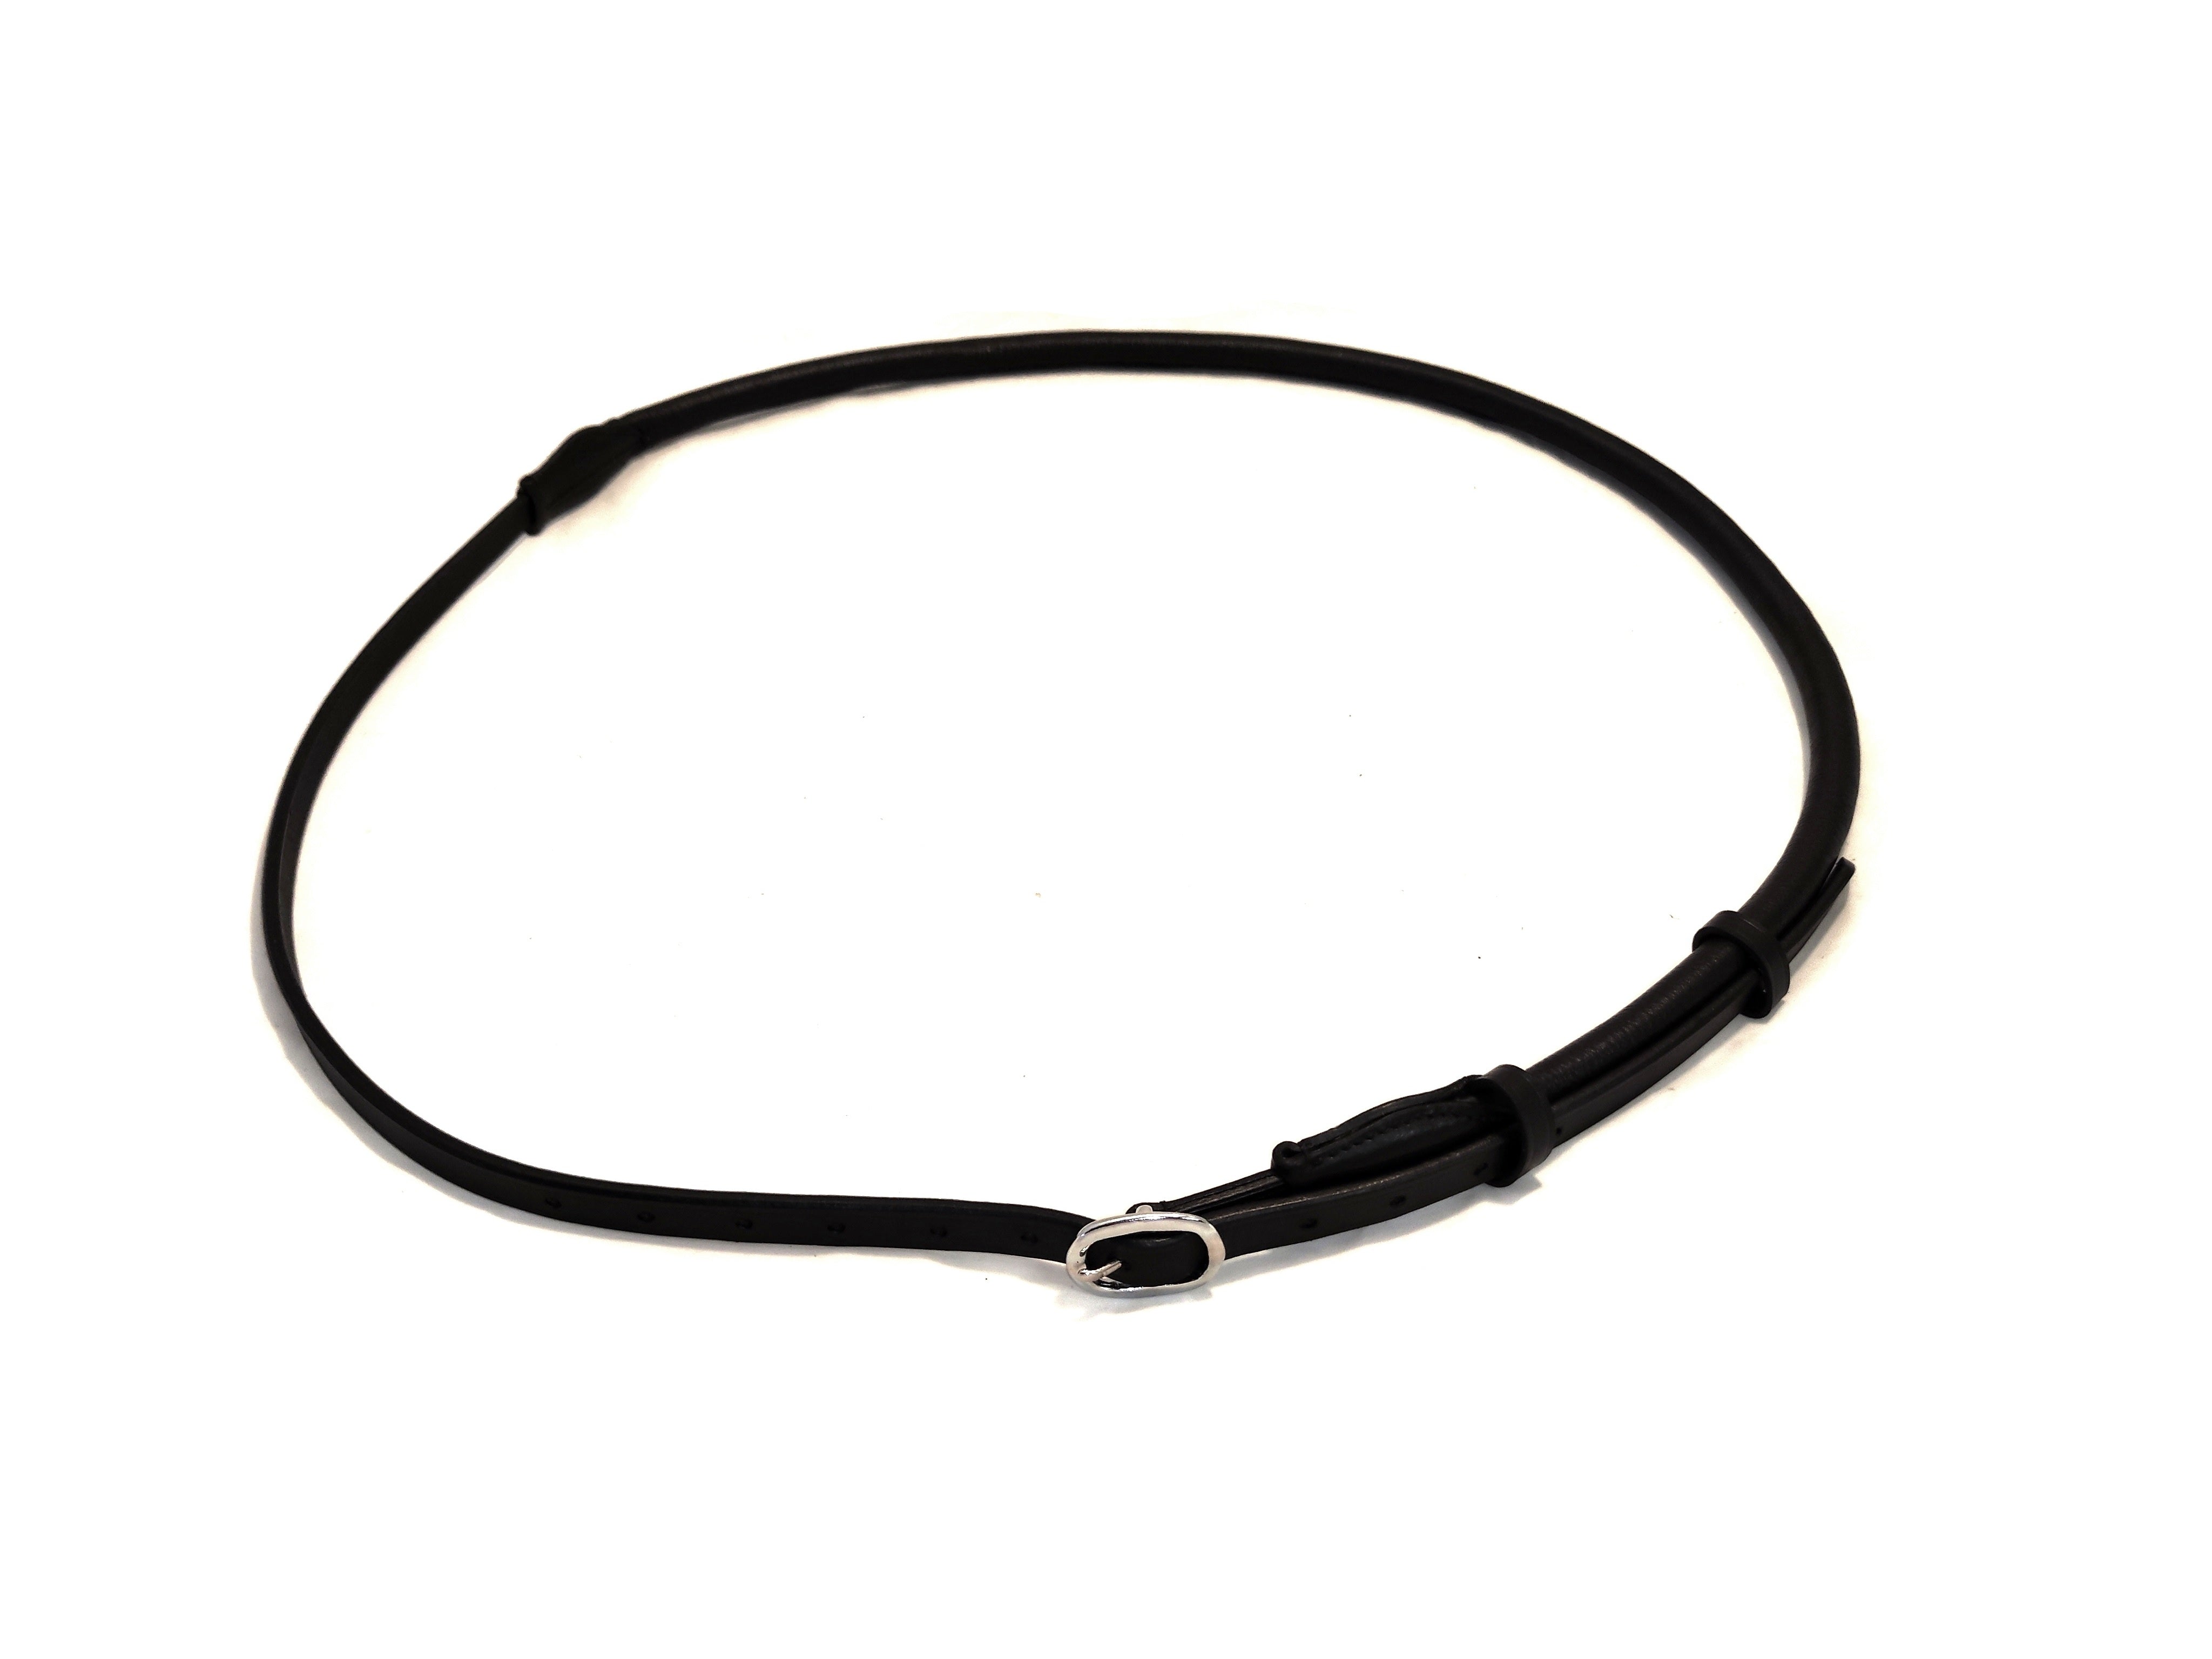 Leather neck ring neck strap "Round" adjustable for horses